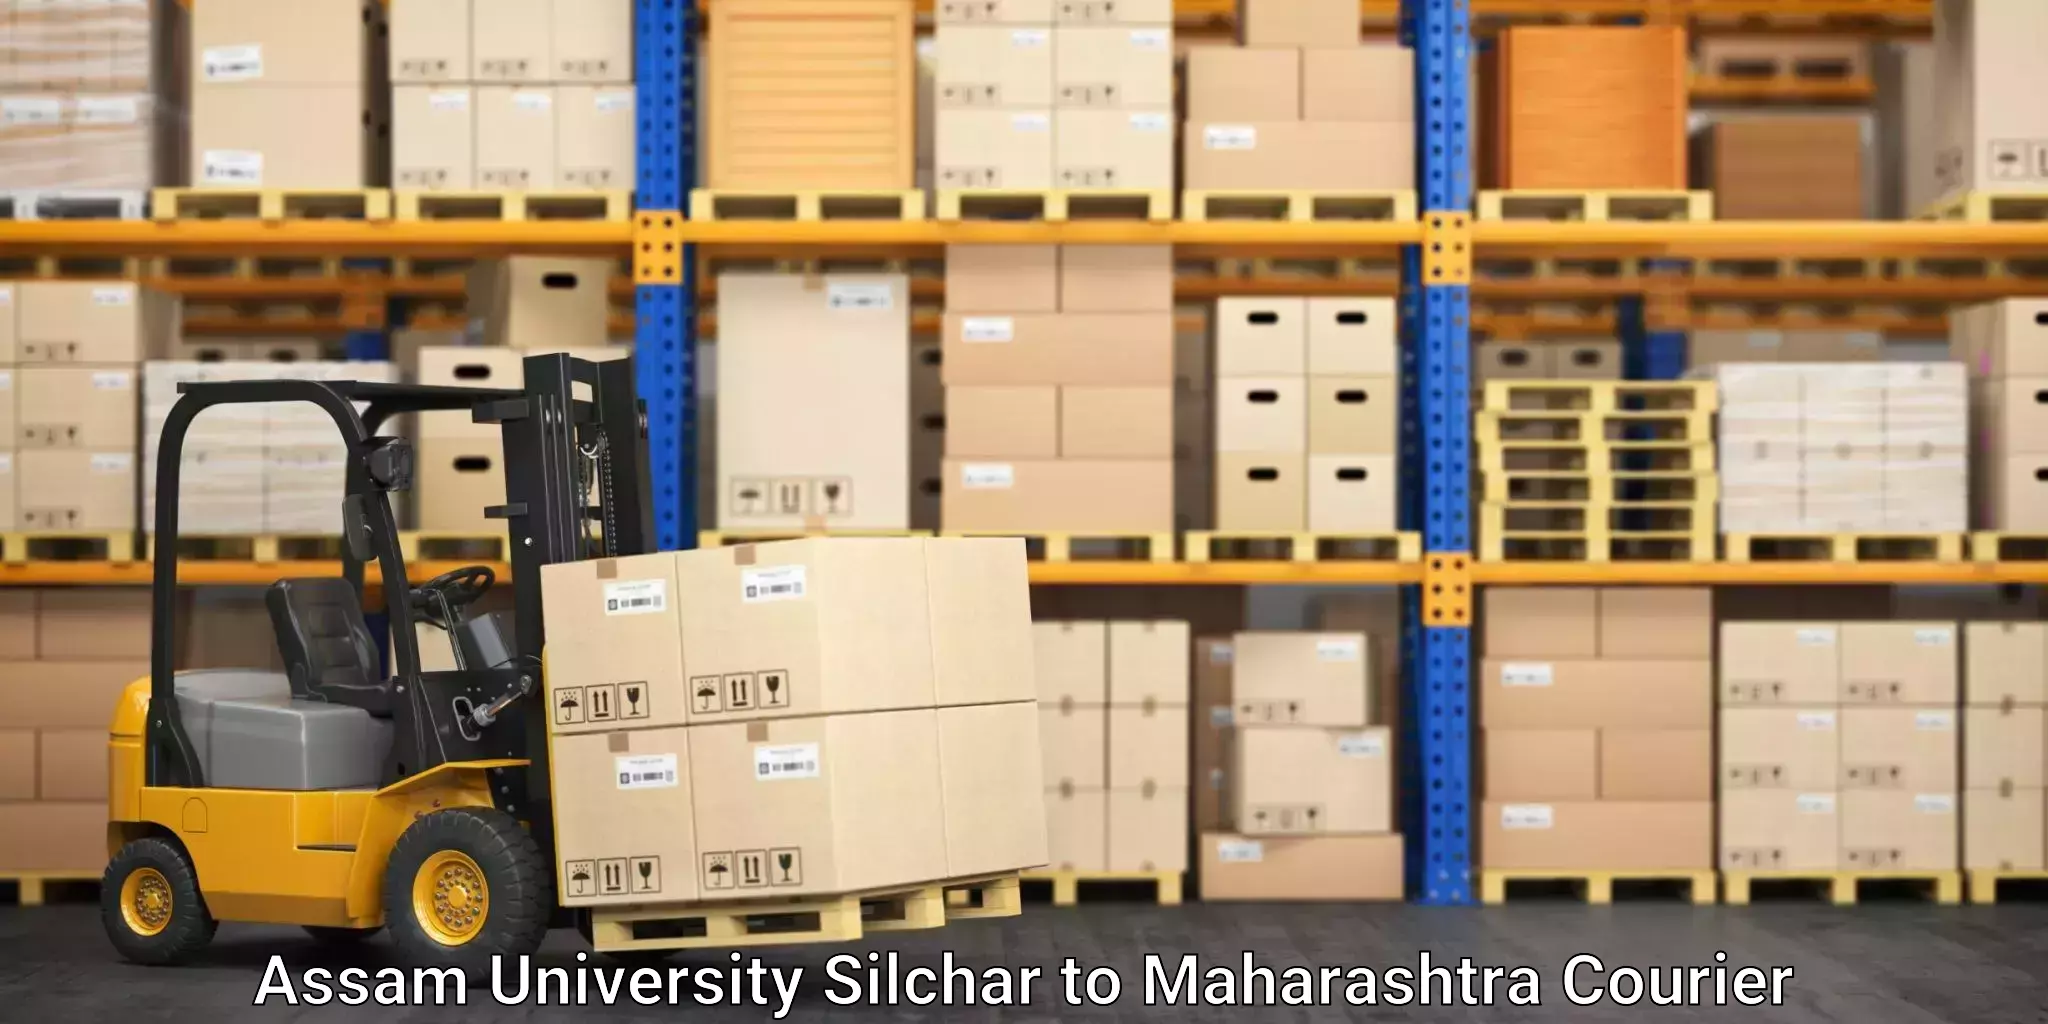 Supply chain delivery Assam University Silchar to Gangakher